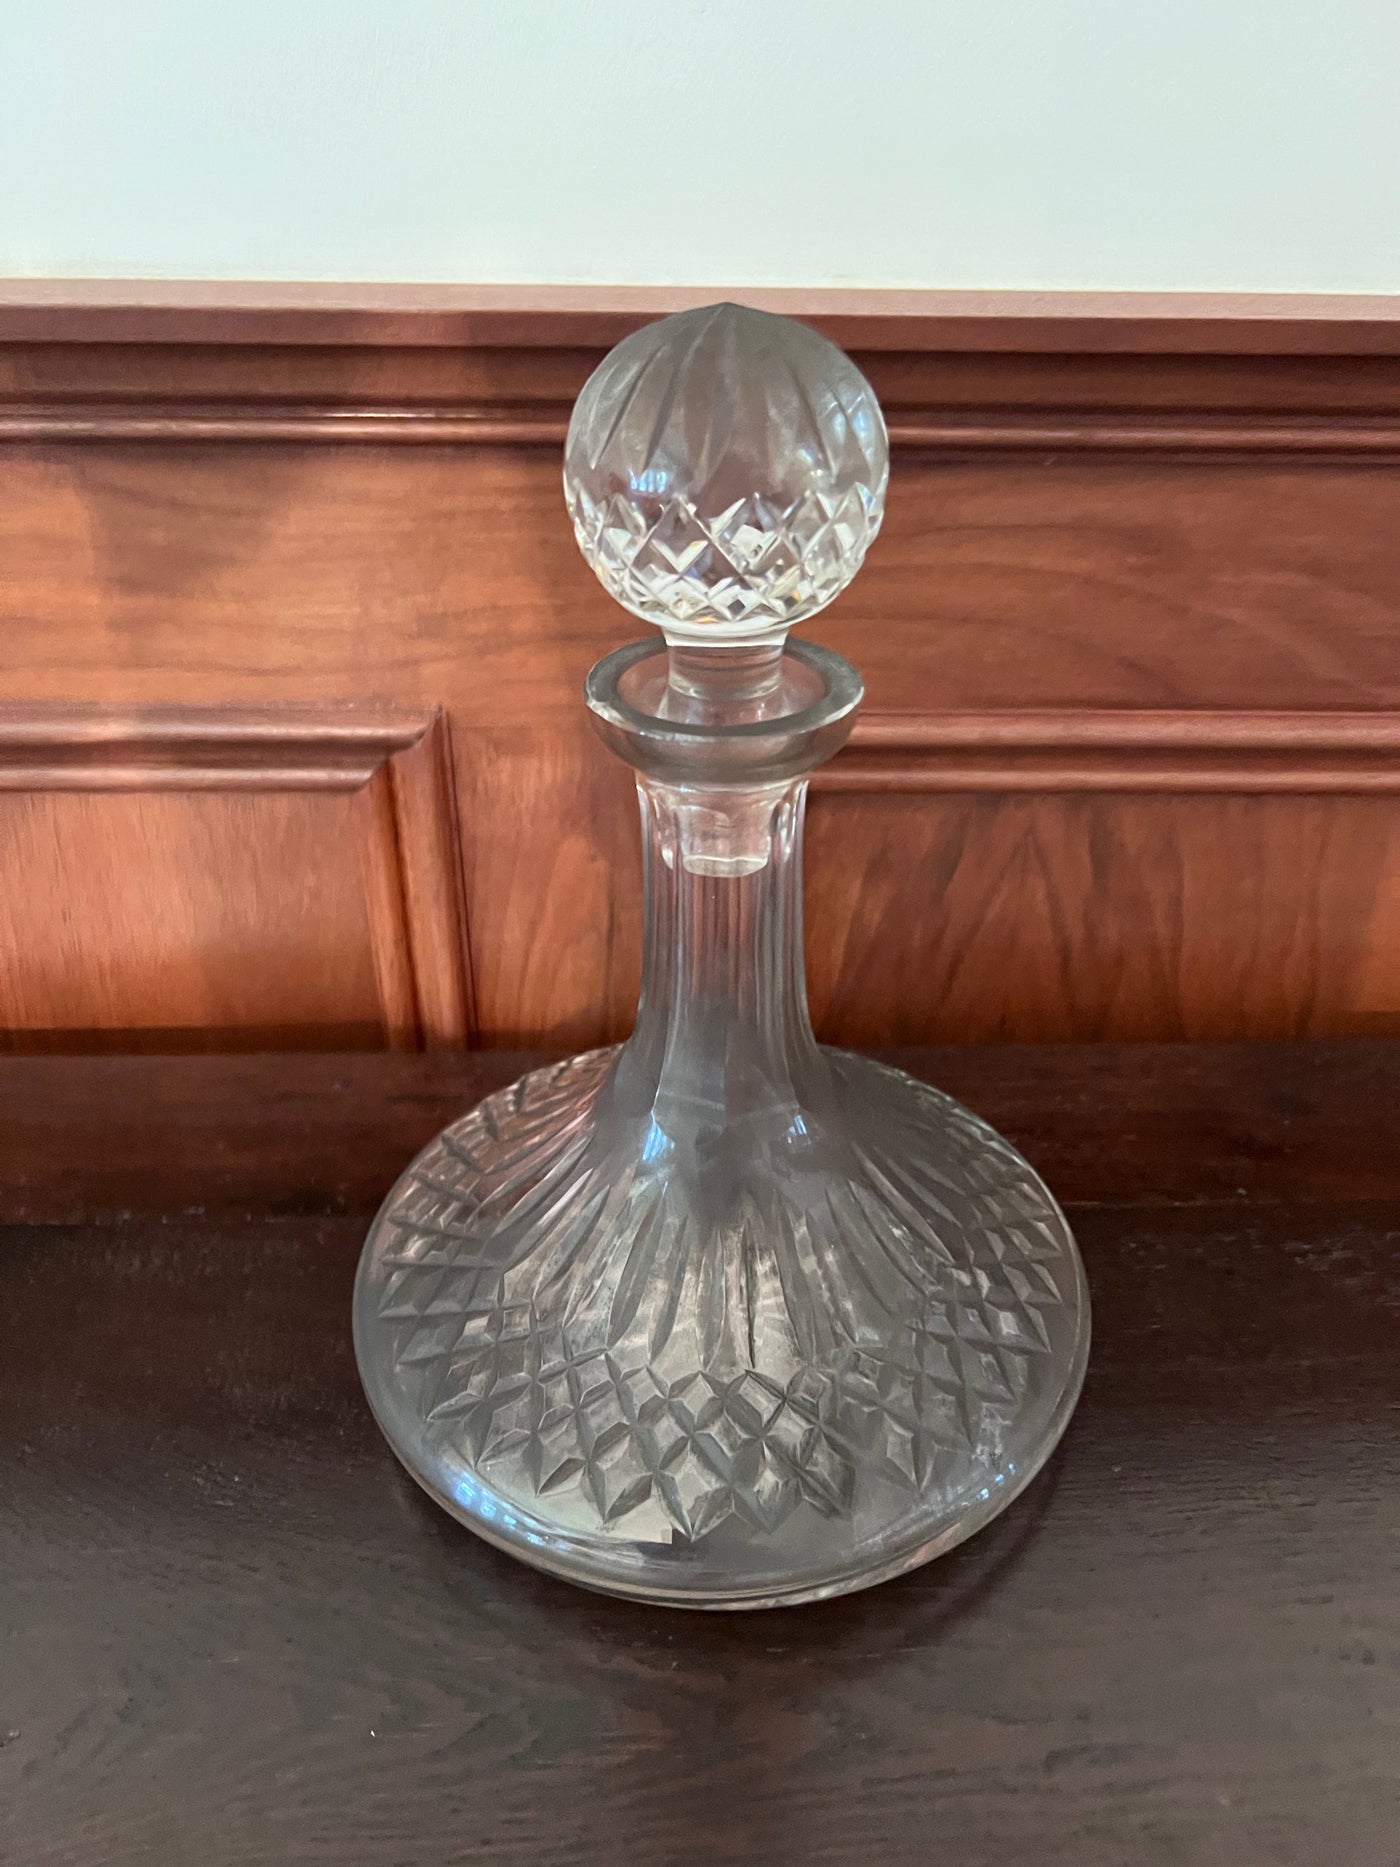 Waterford Crystal Ships Decanter – Sell My Stuff Canada - Canada's